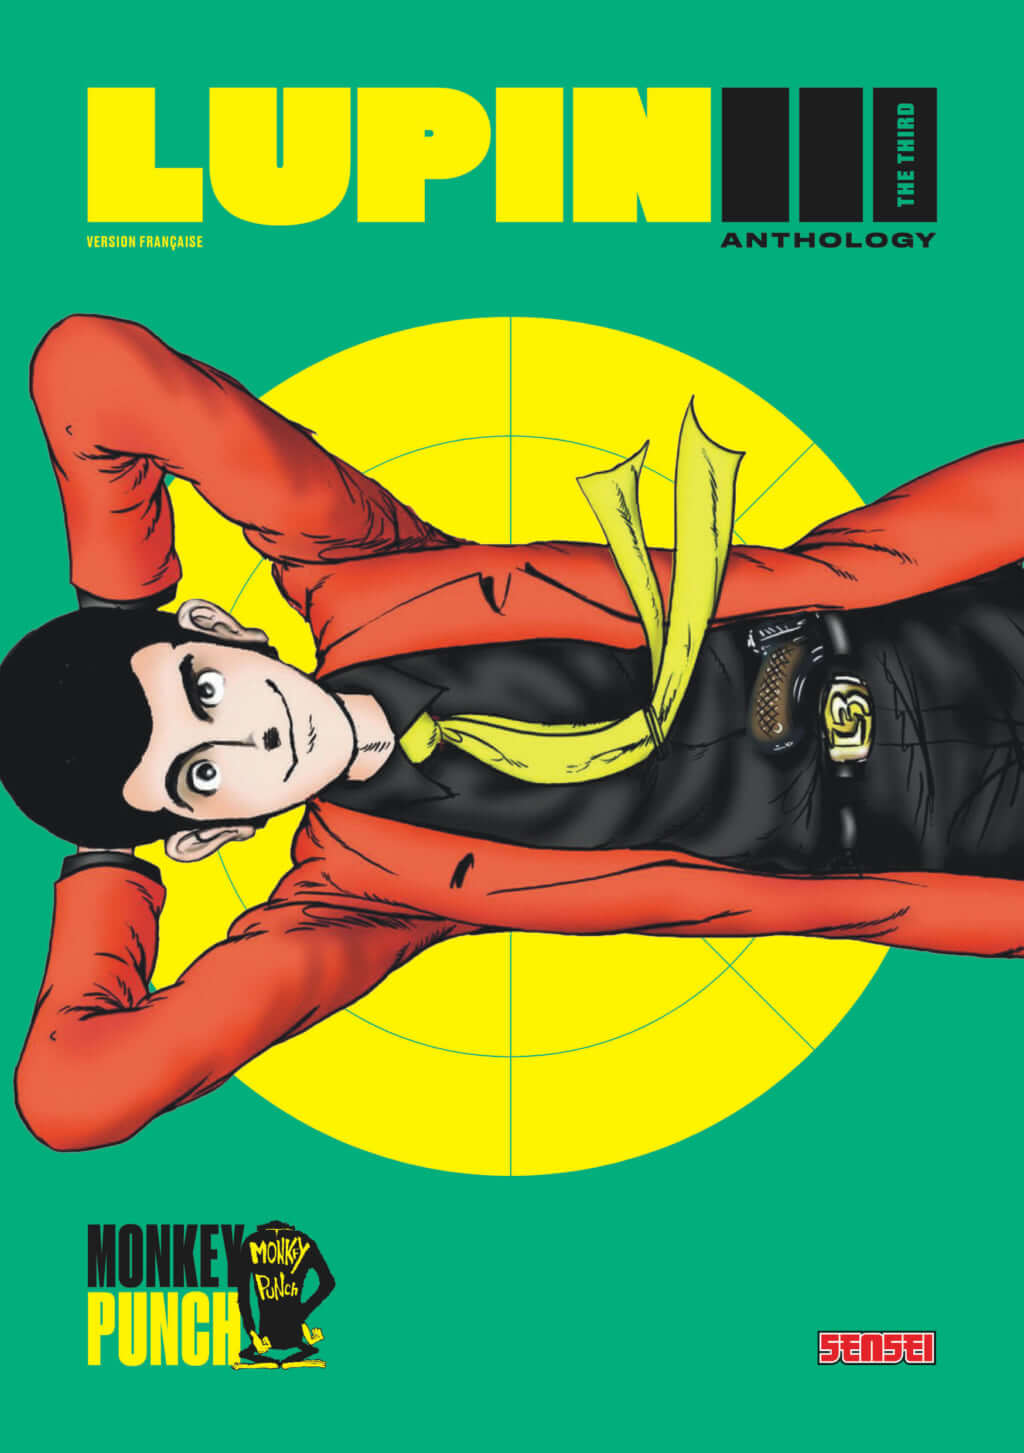 Lupin III, the Pop Culture Icon Created by Monkey Punch / Pen ペン